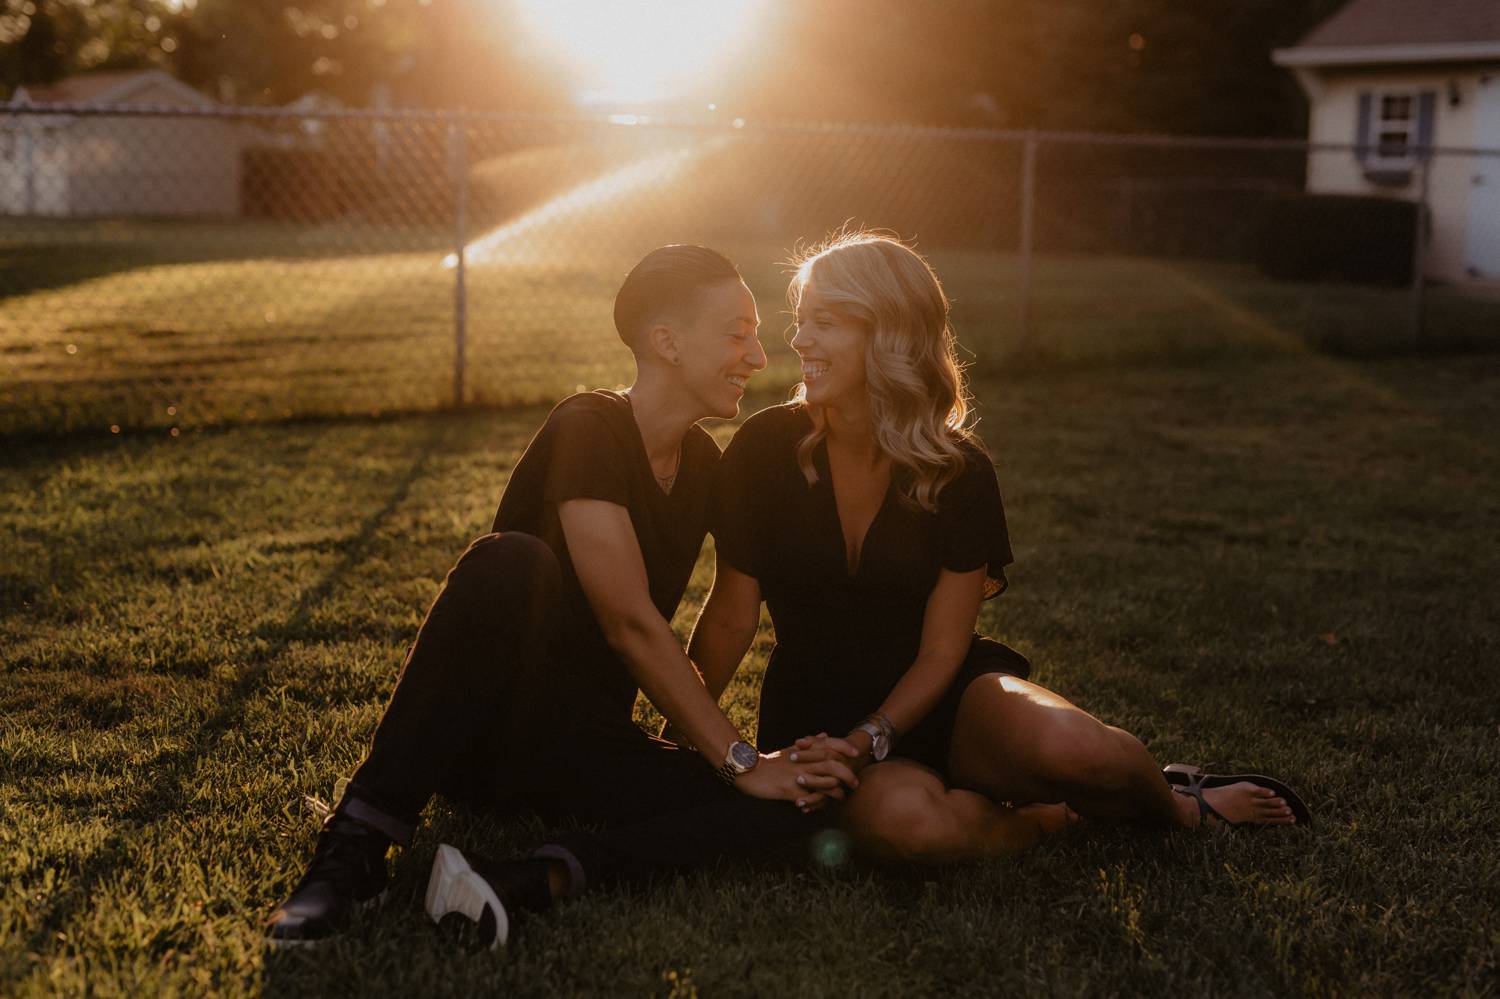 A queer couples sits in the grass as the sun sets, their foreheads nearly touching